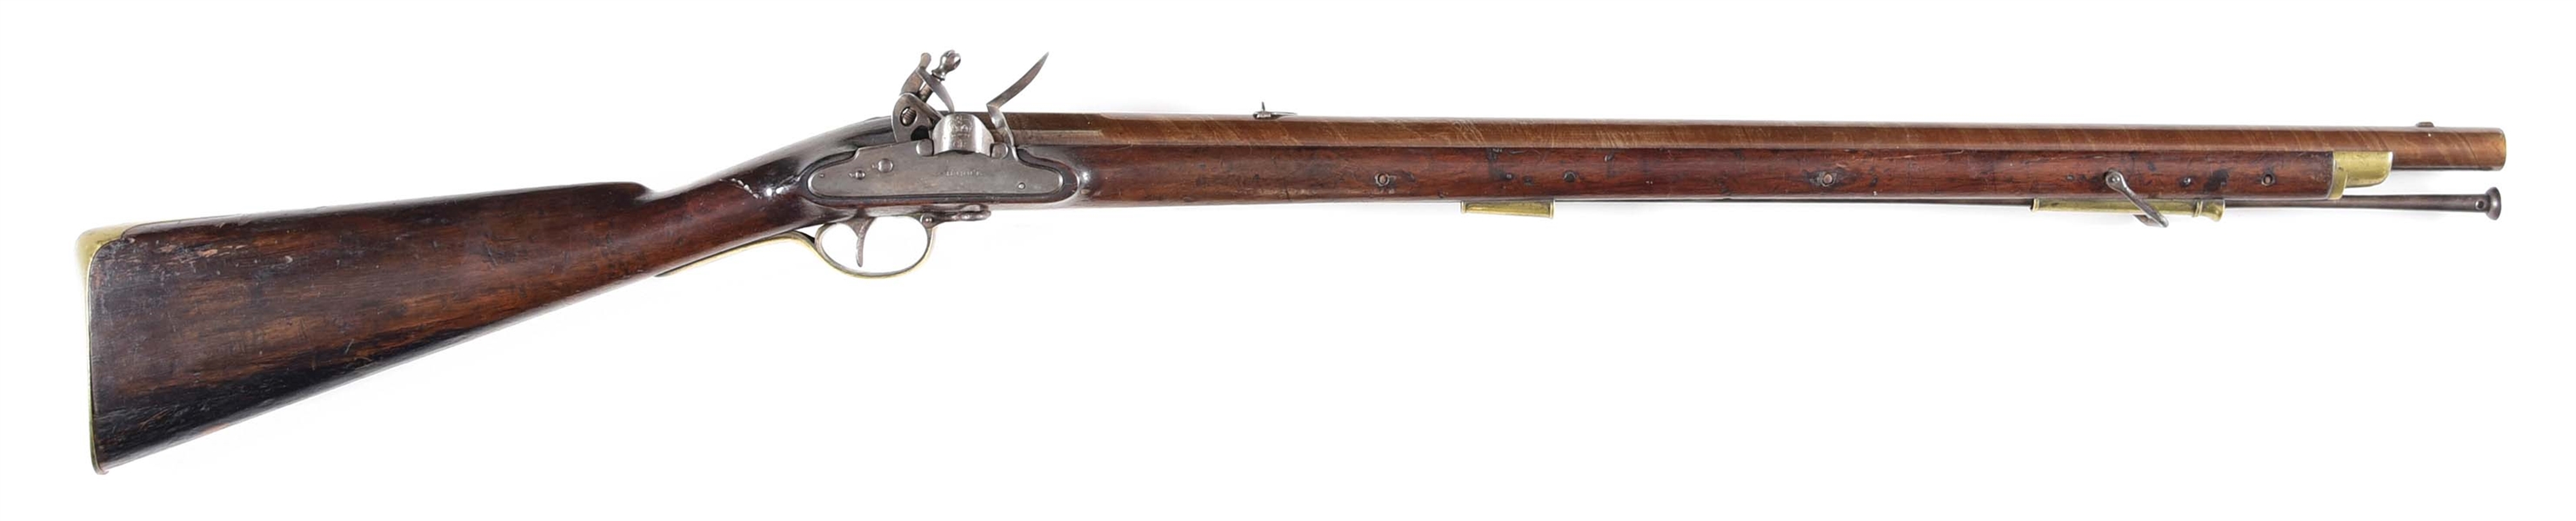 (A) A RARE FLINTLOCK RIFLED CARBINE BY NOCK WITH ENCLOSED LOCK, C. 1796.